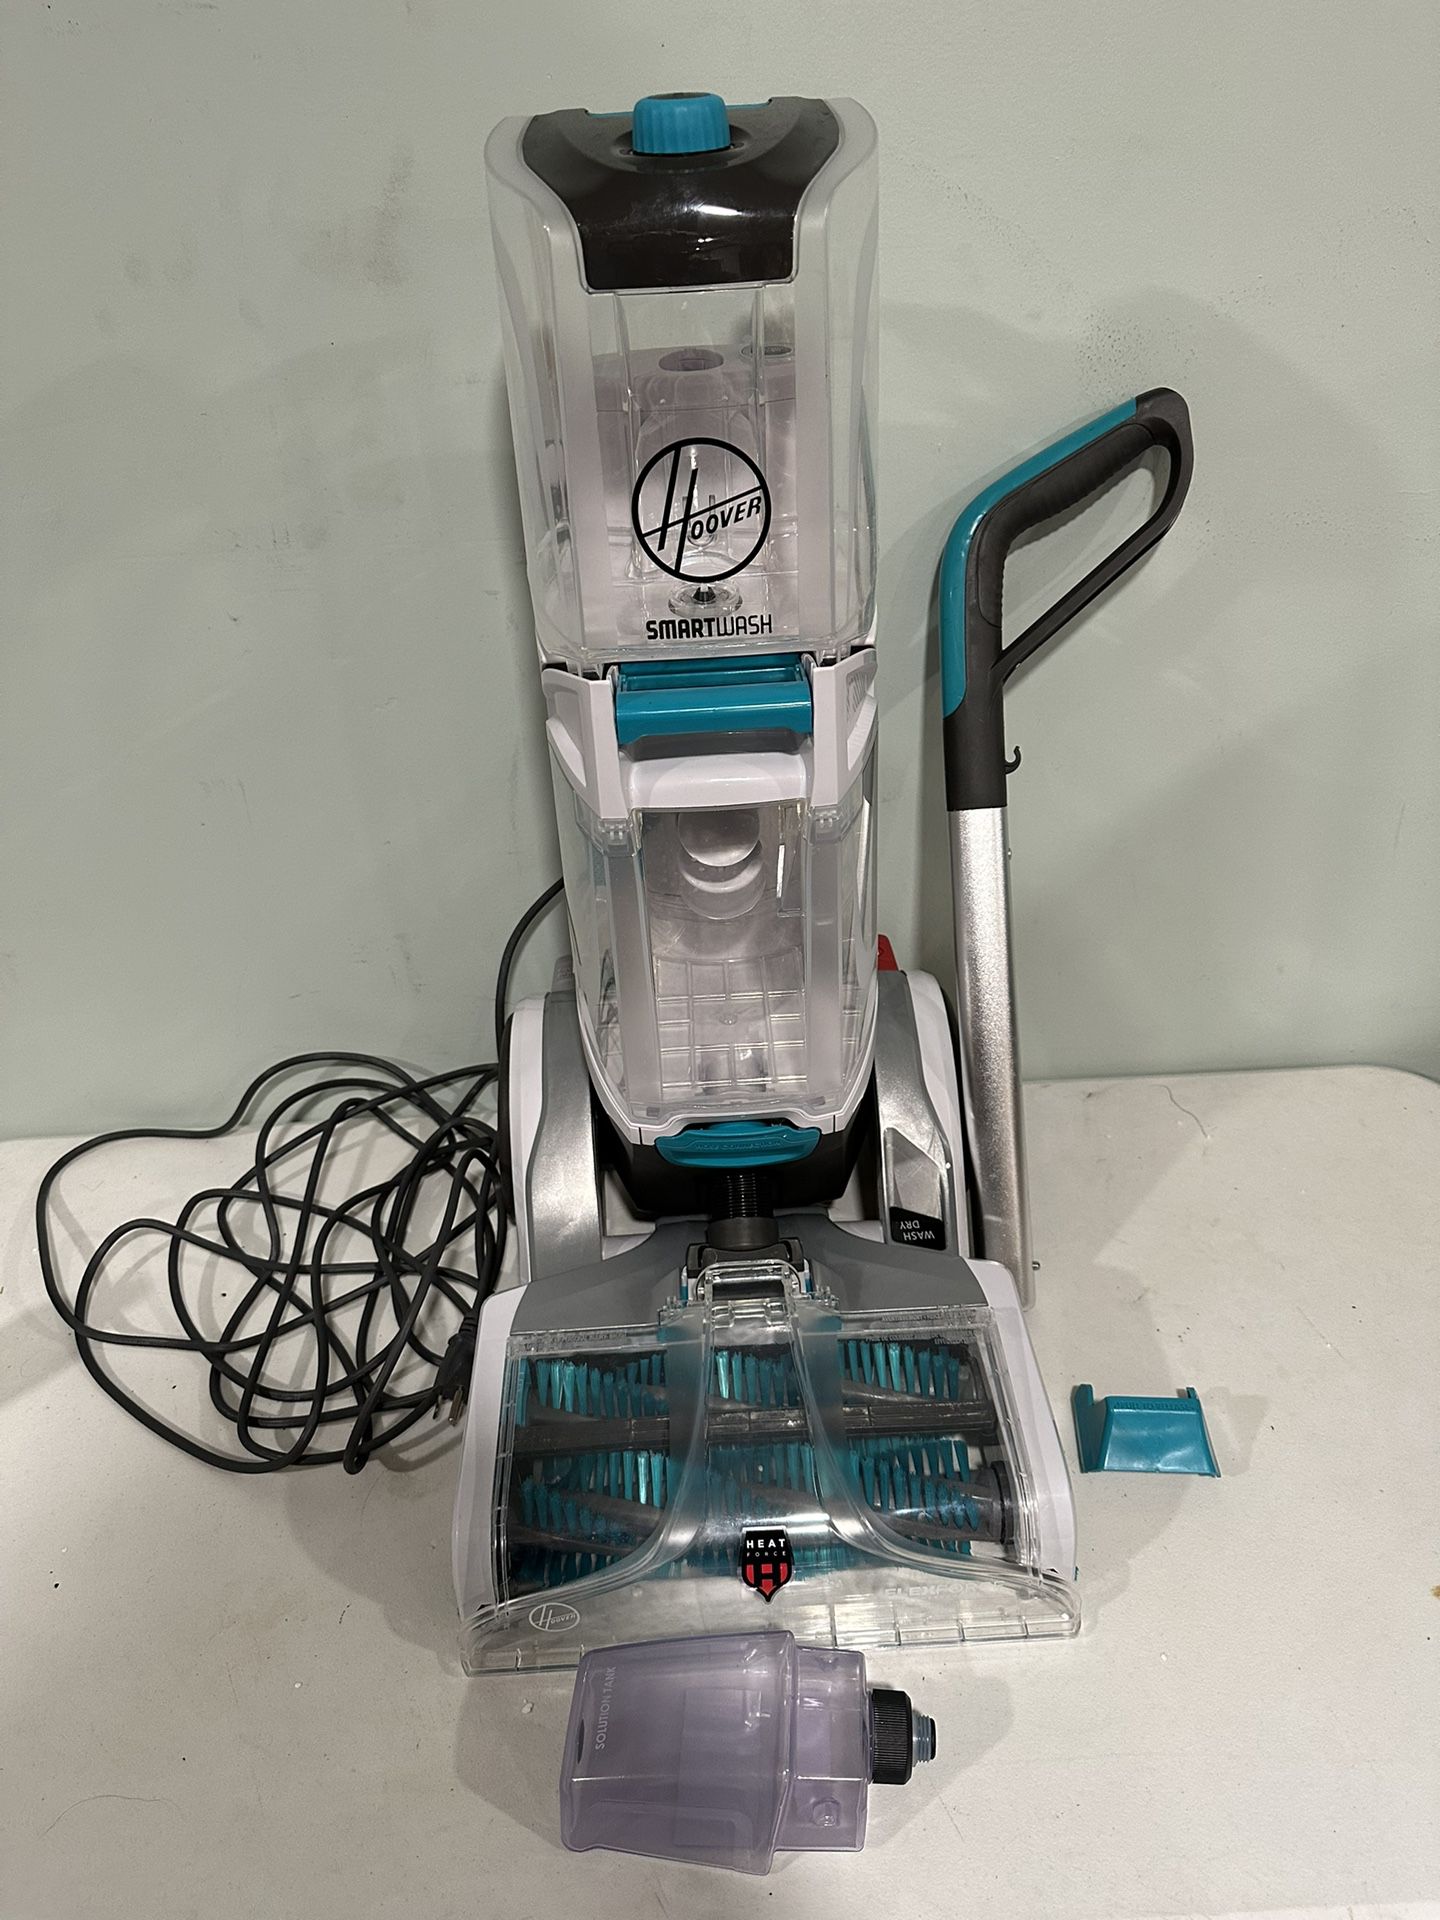 Hoover Smartwash Automatic Carpet Cleaner, FH52000, Turquoise 